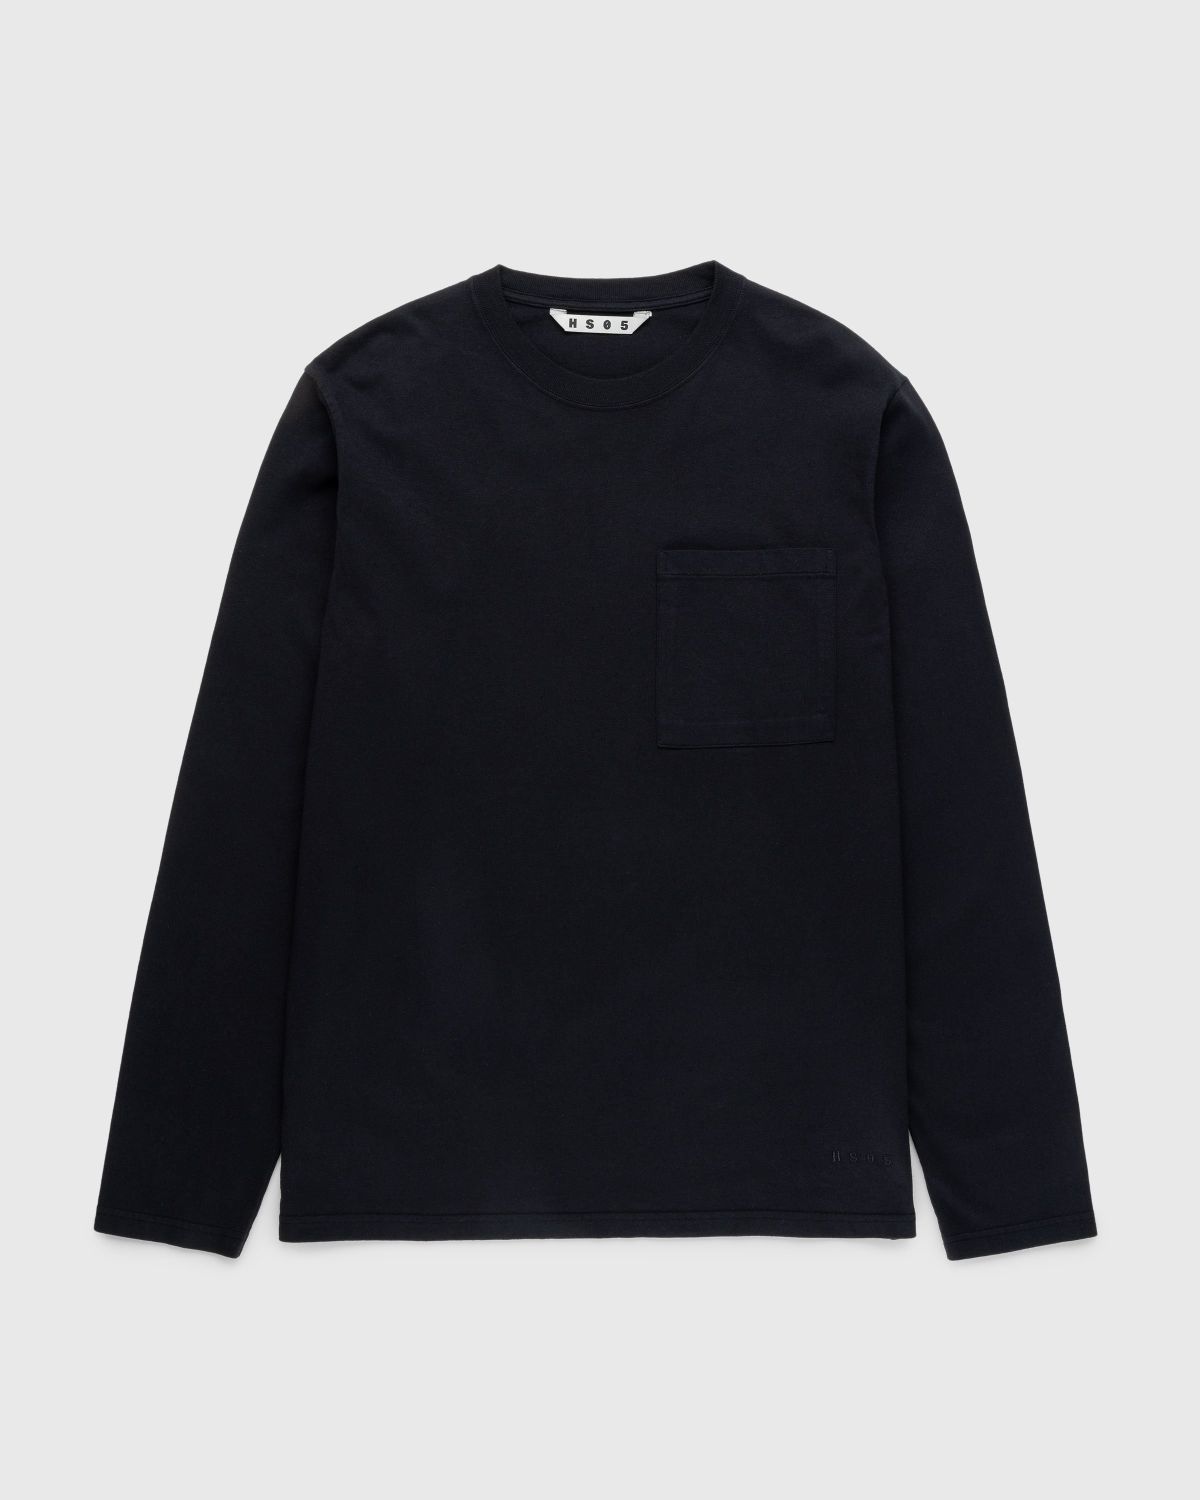 Highsnobiety HS05 – Pigment Dyed Boxy Long Sleeves Jersey Black - Longsleeves - Black - Image 1